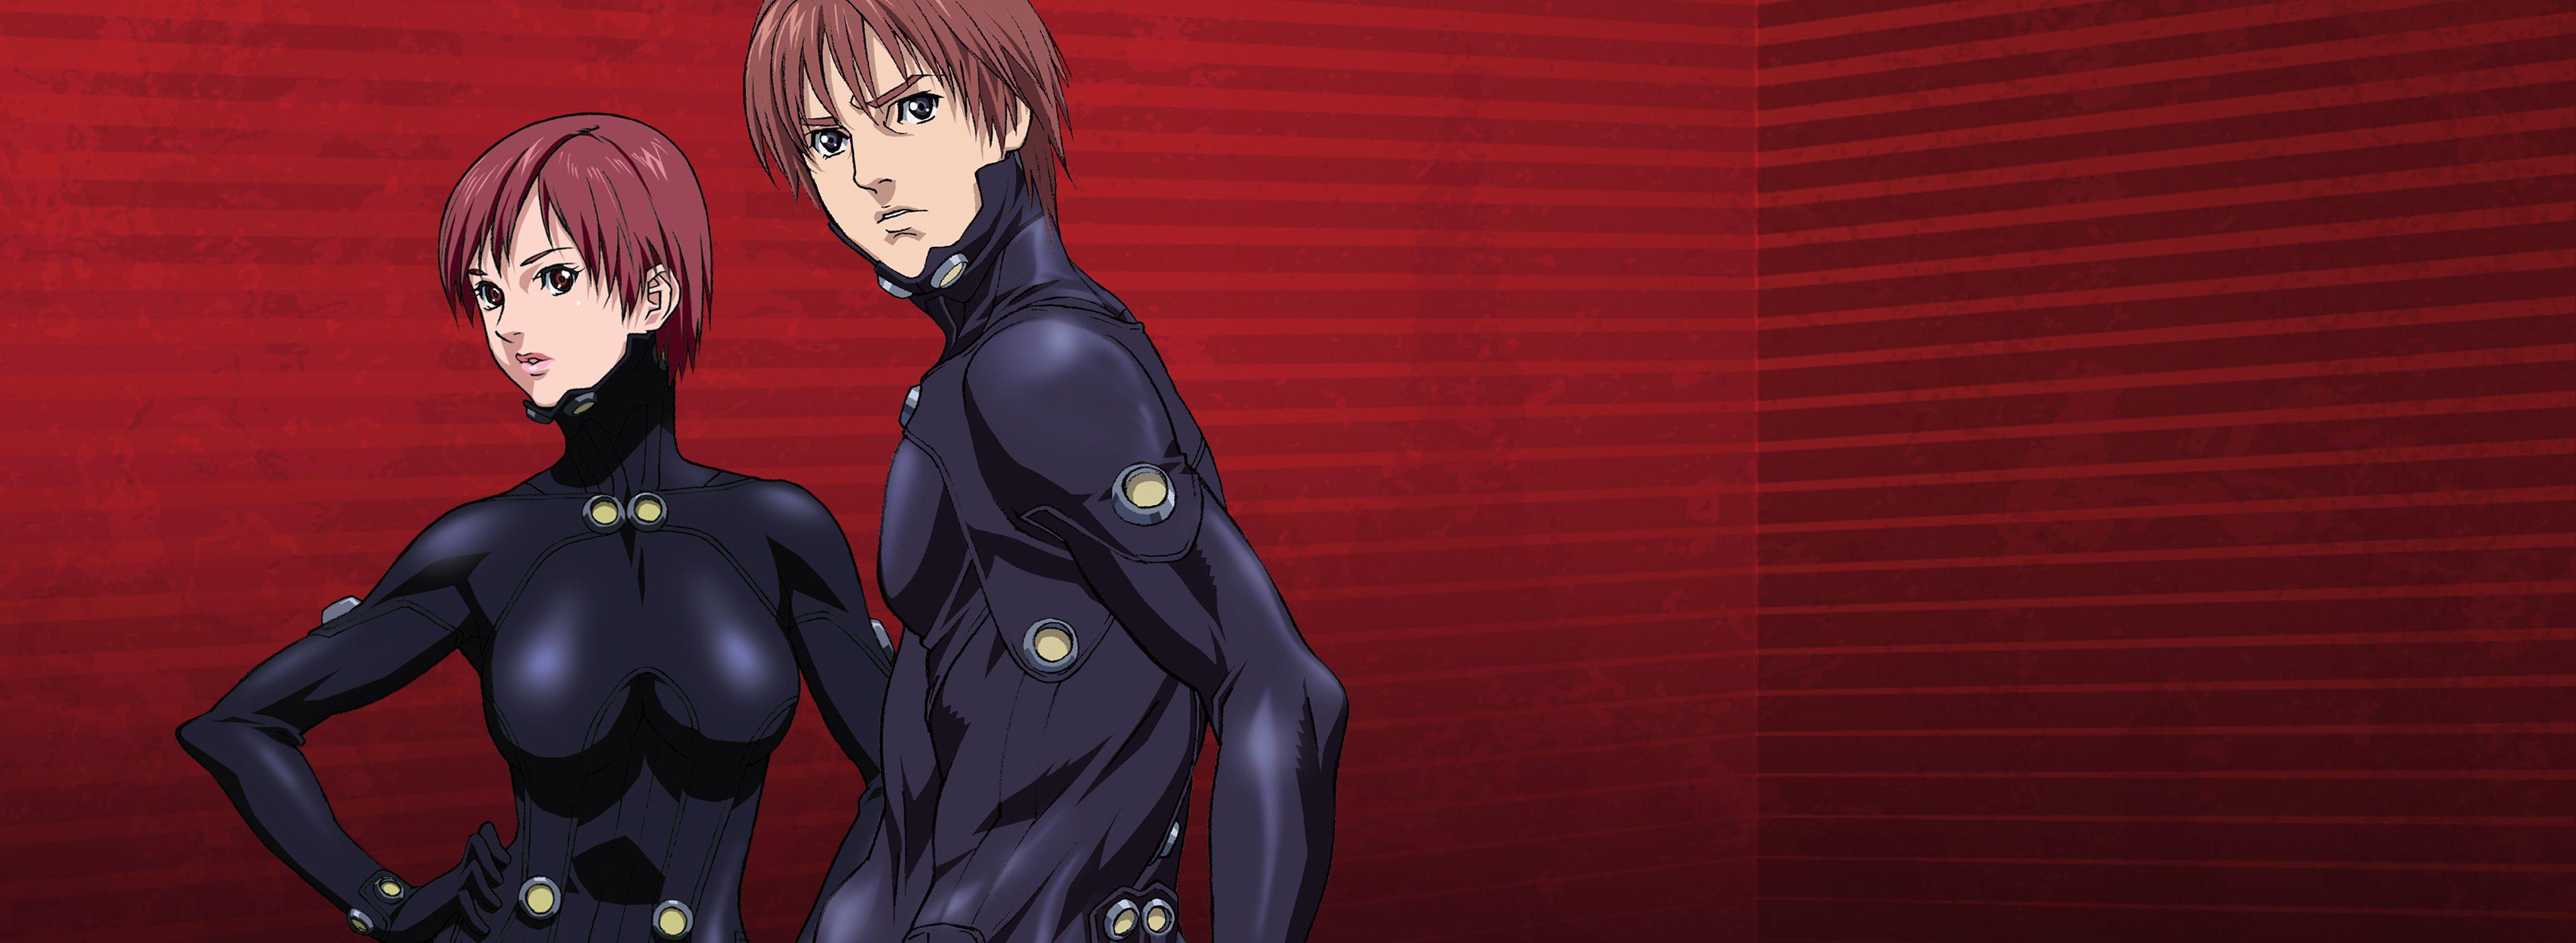 Gantz Full HD Wallpapers and Backgrounds Image.